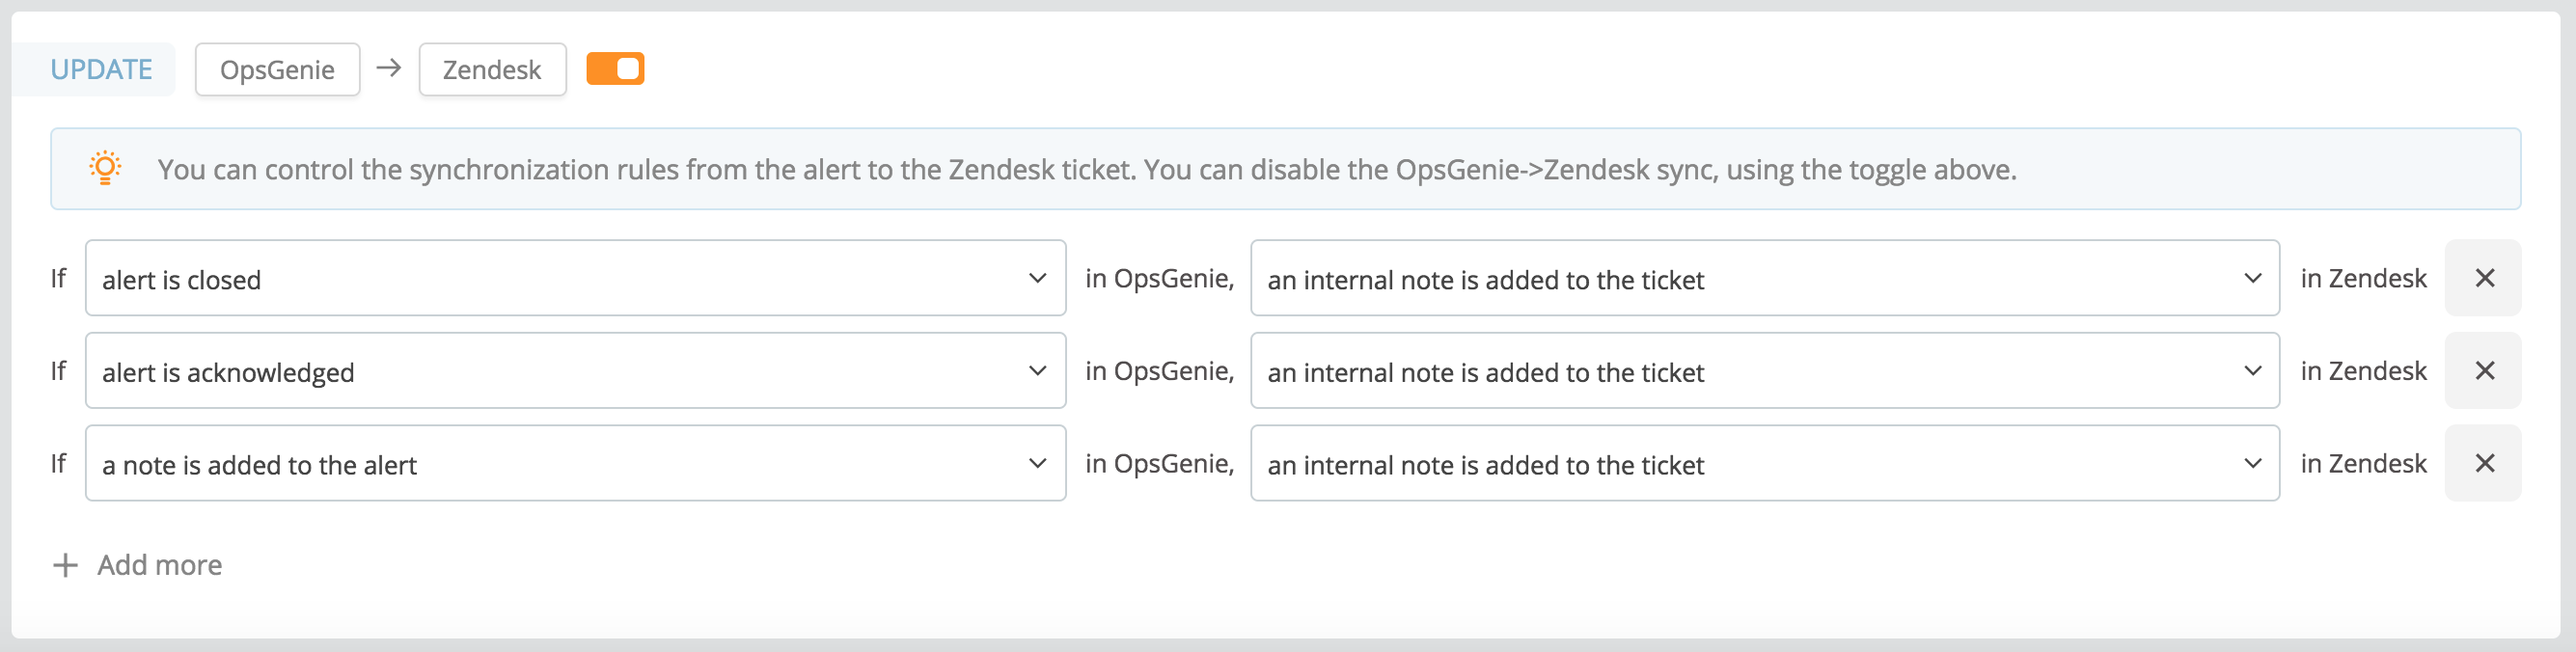 For Opsgenie to Zendesk updates